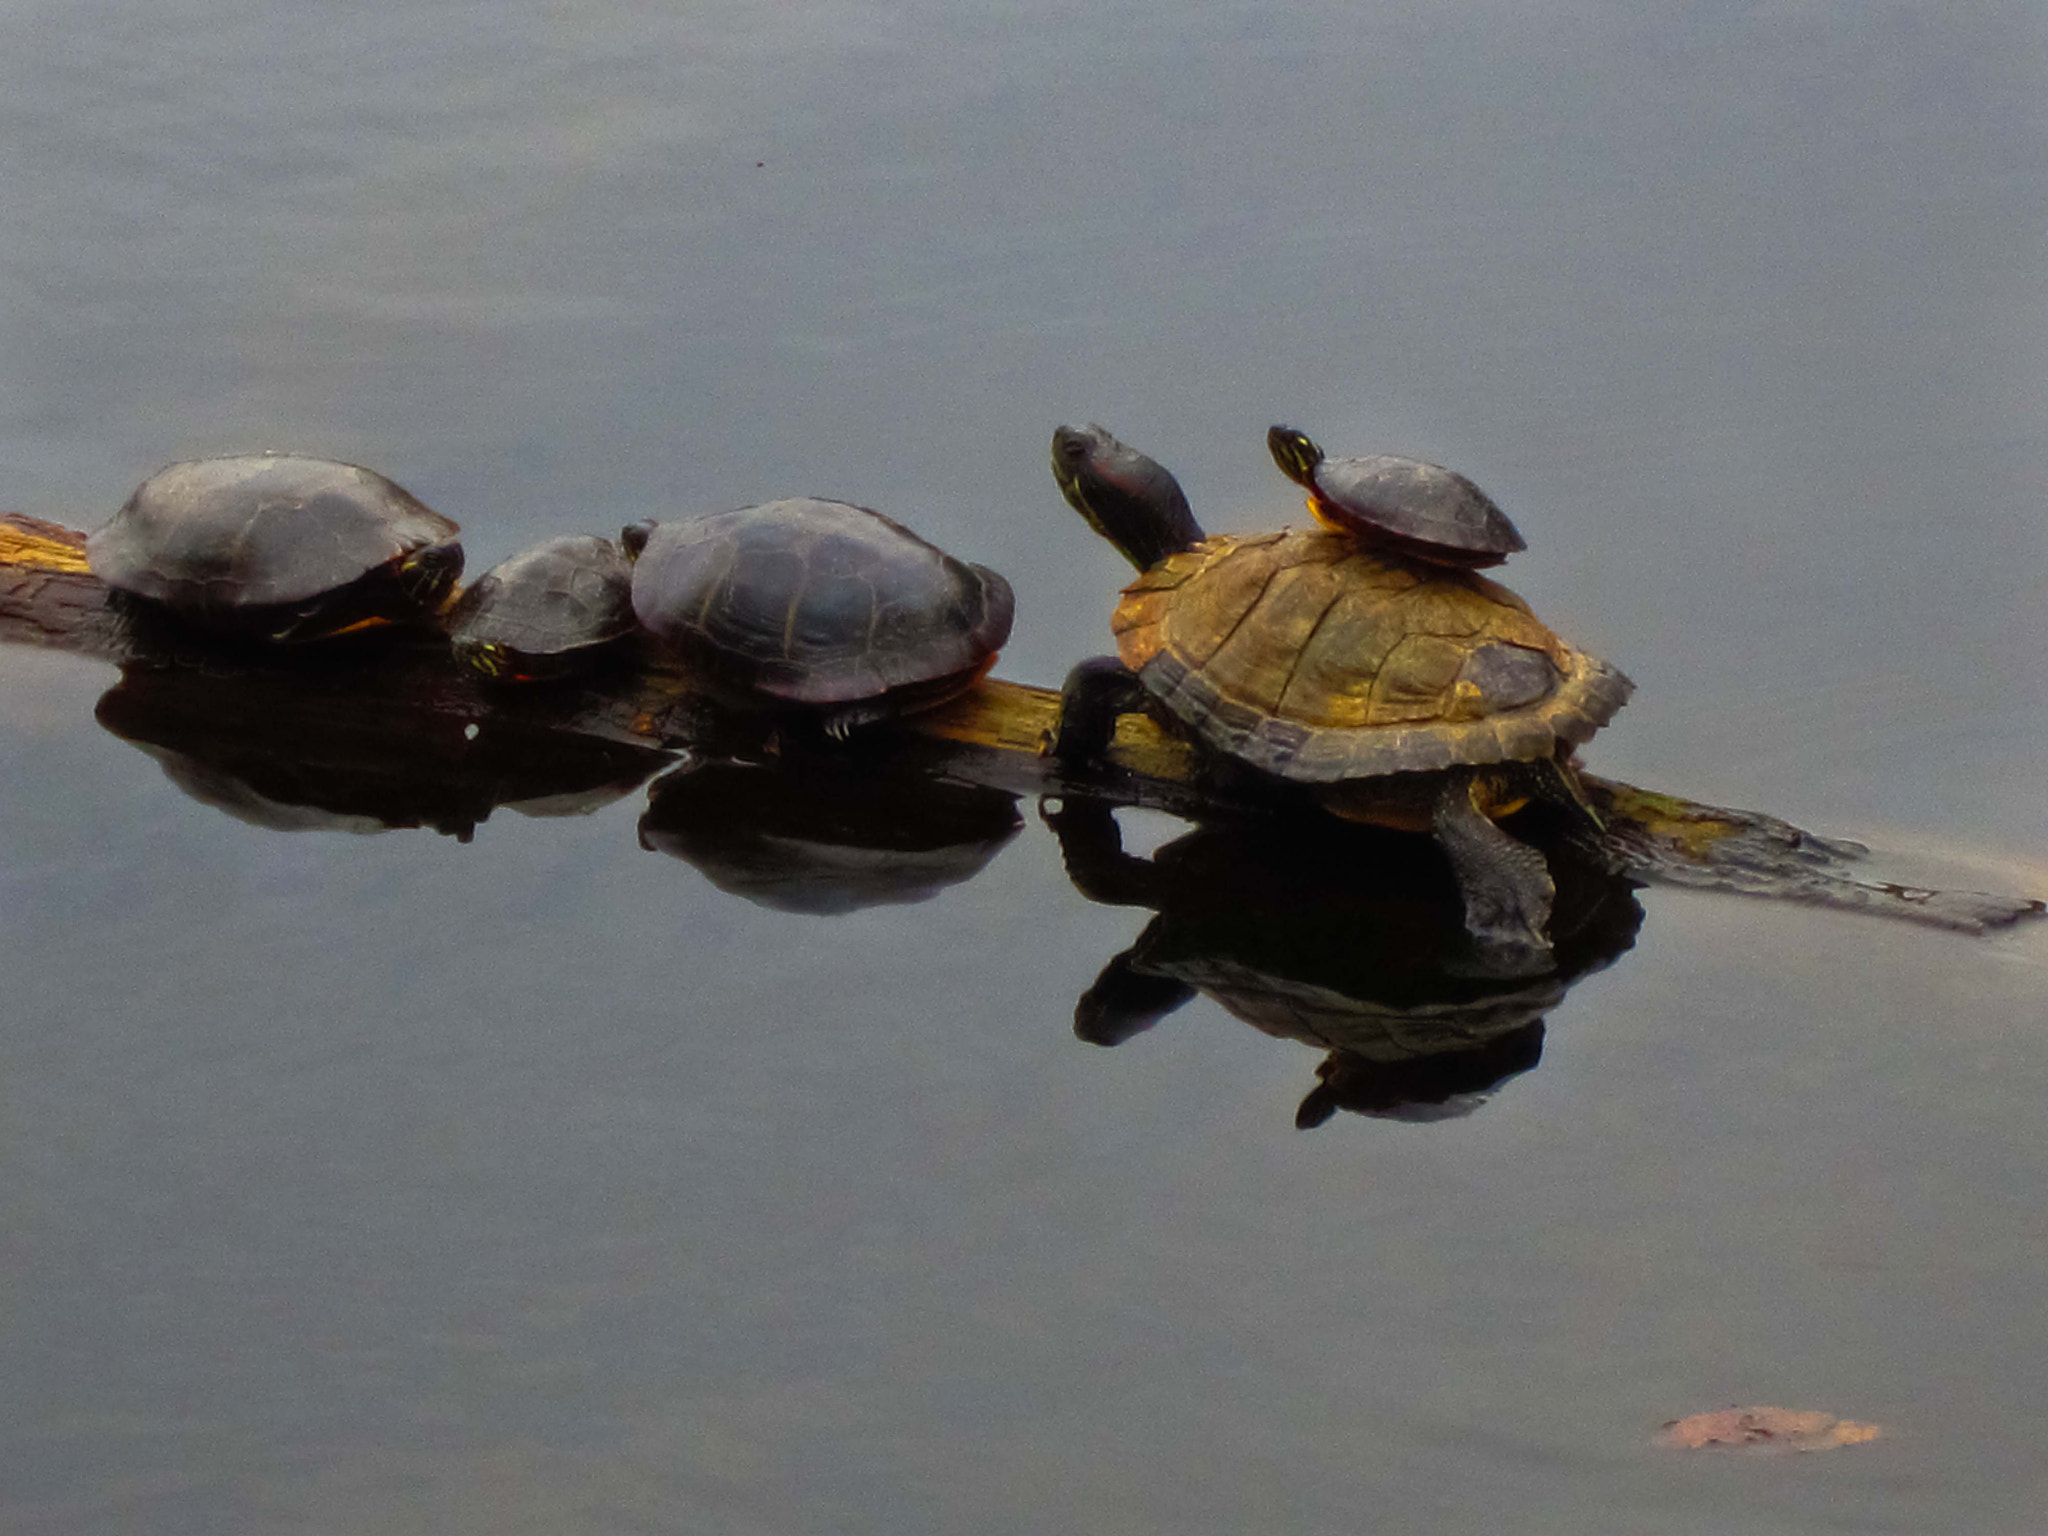 Canon PowerShot ELPH 300 HS (IXUS 220 HS / IXY 410F) sample photo. Turtles resting on a log photography